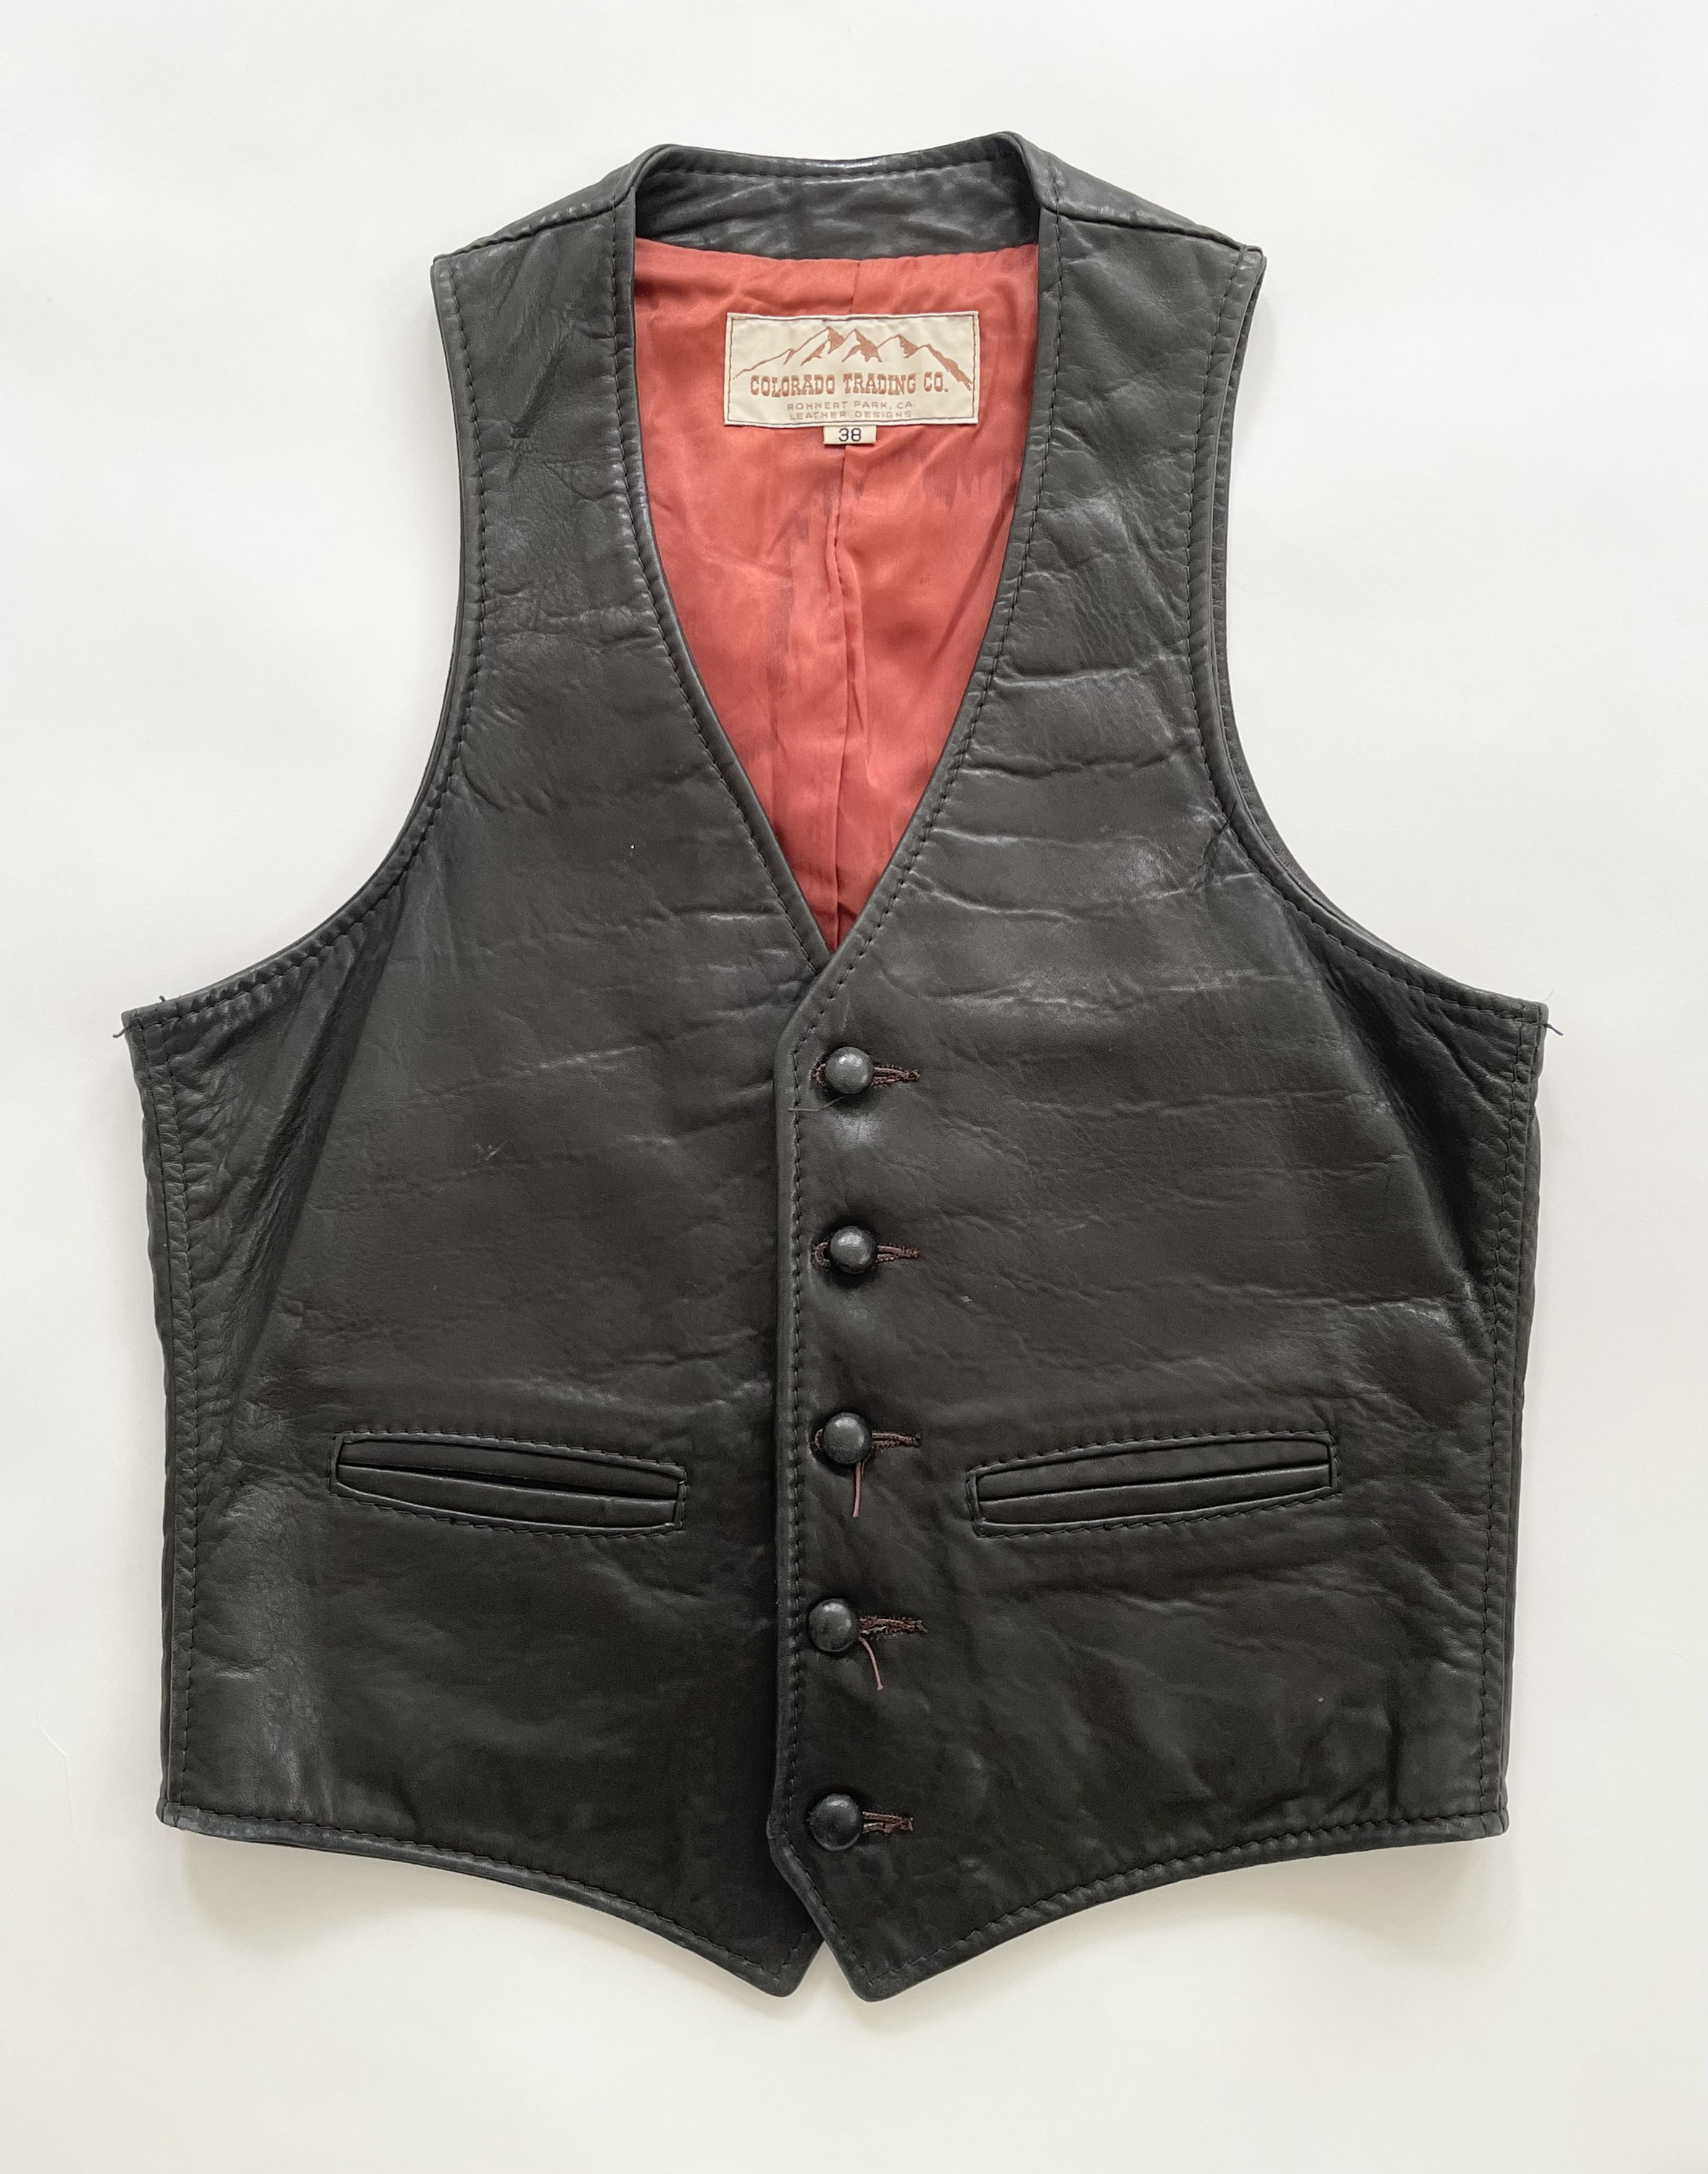 Buttery Soft Leather Vest Vintage Colorado Trading Co Worn Espresso ...